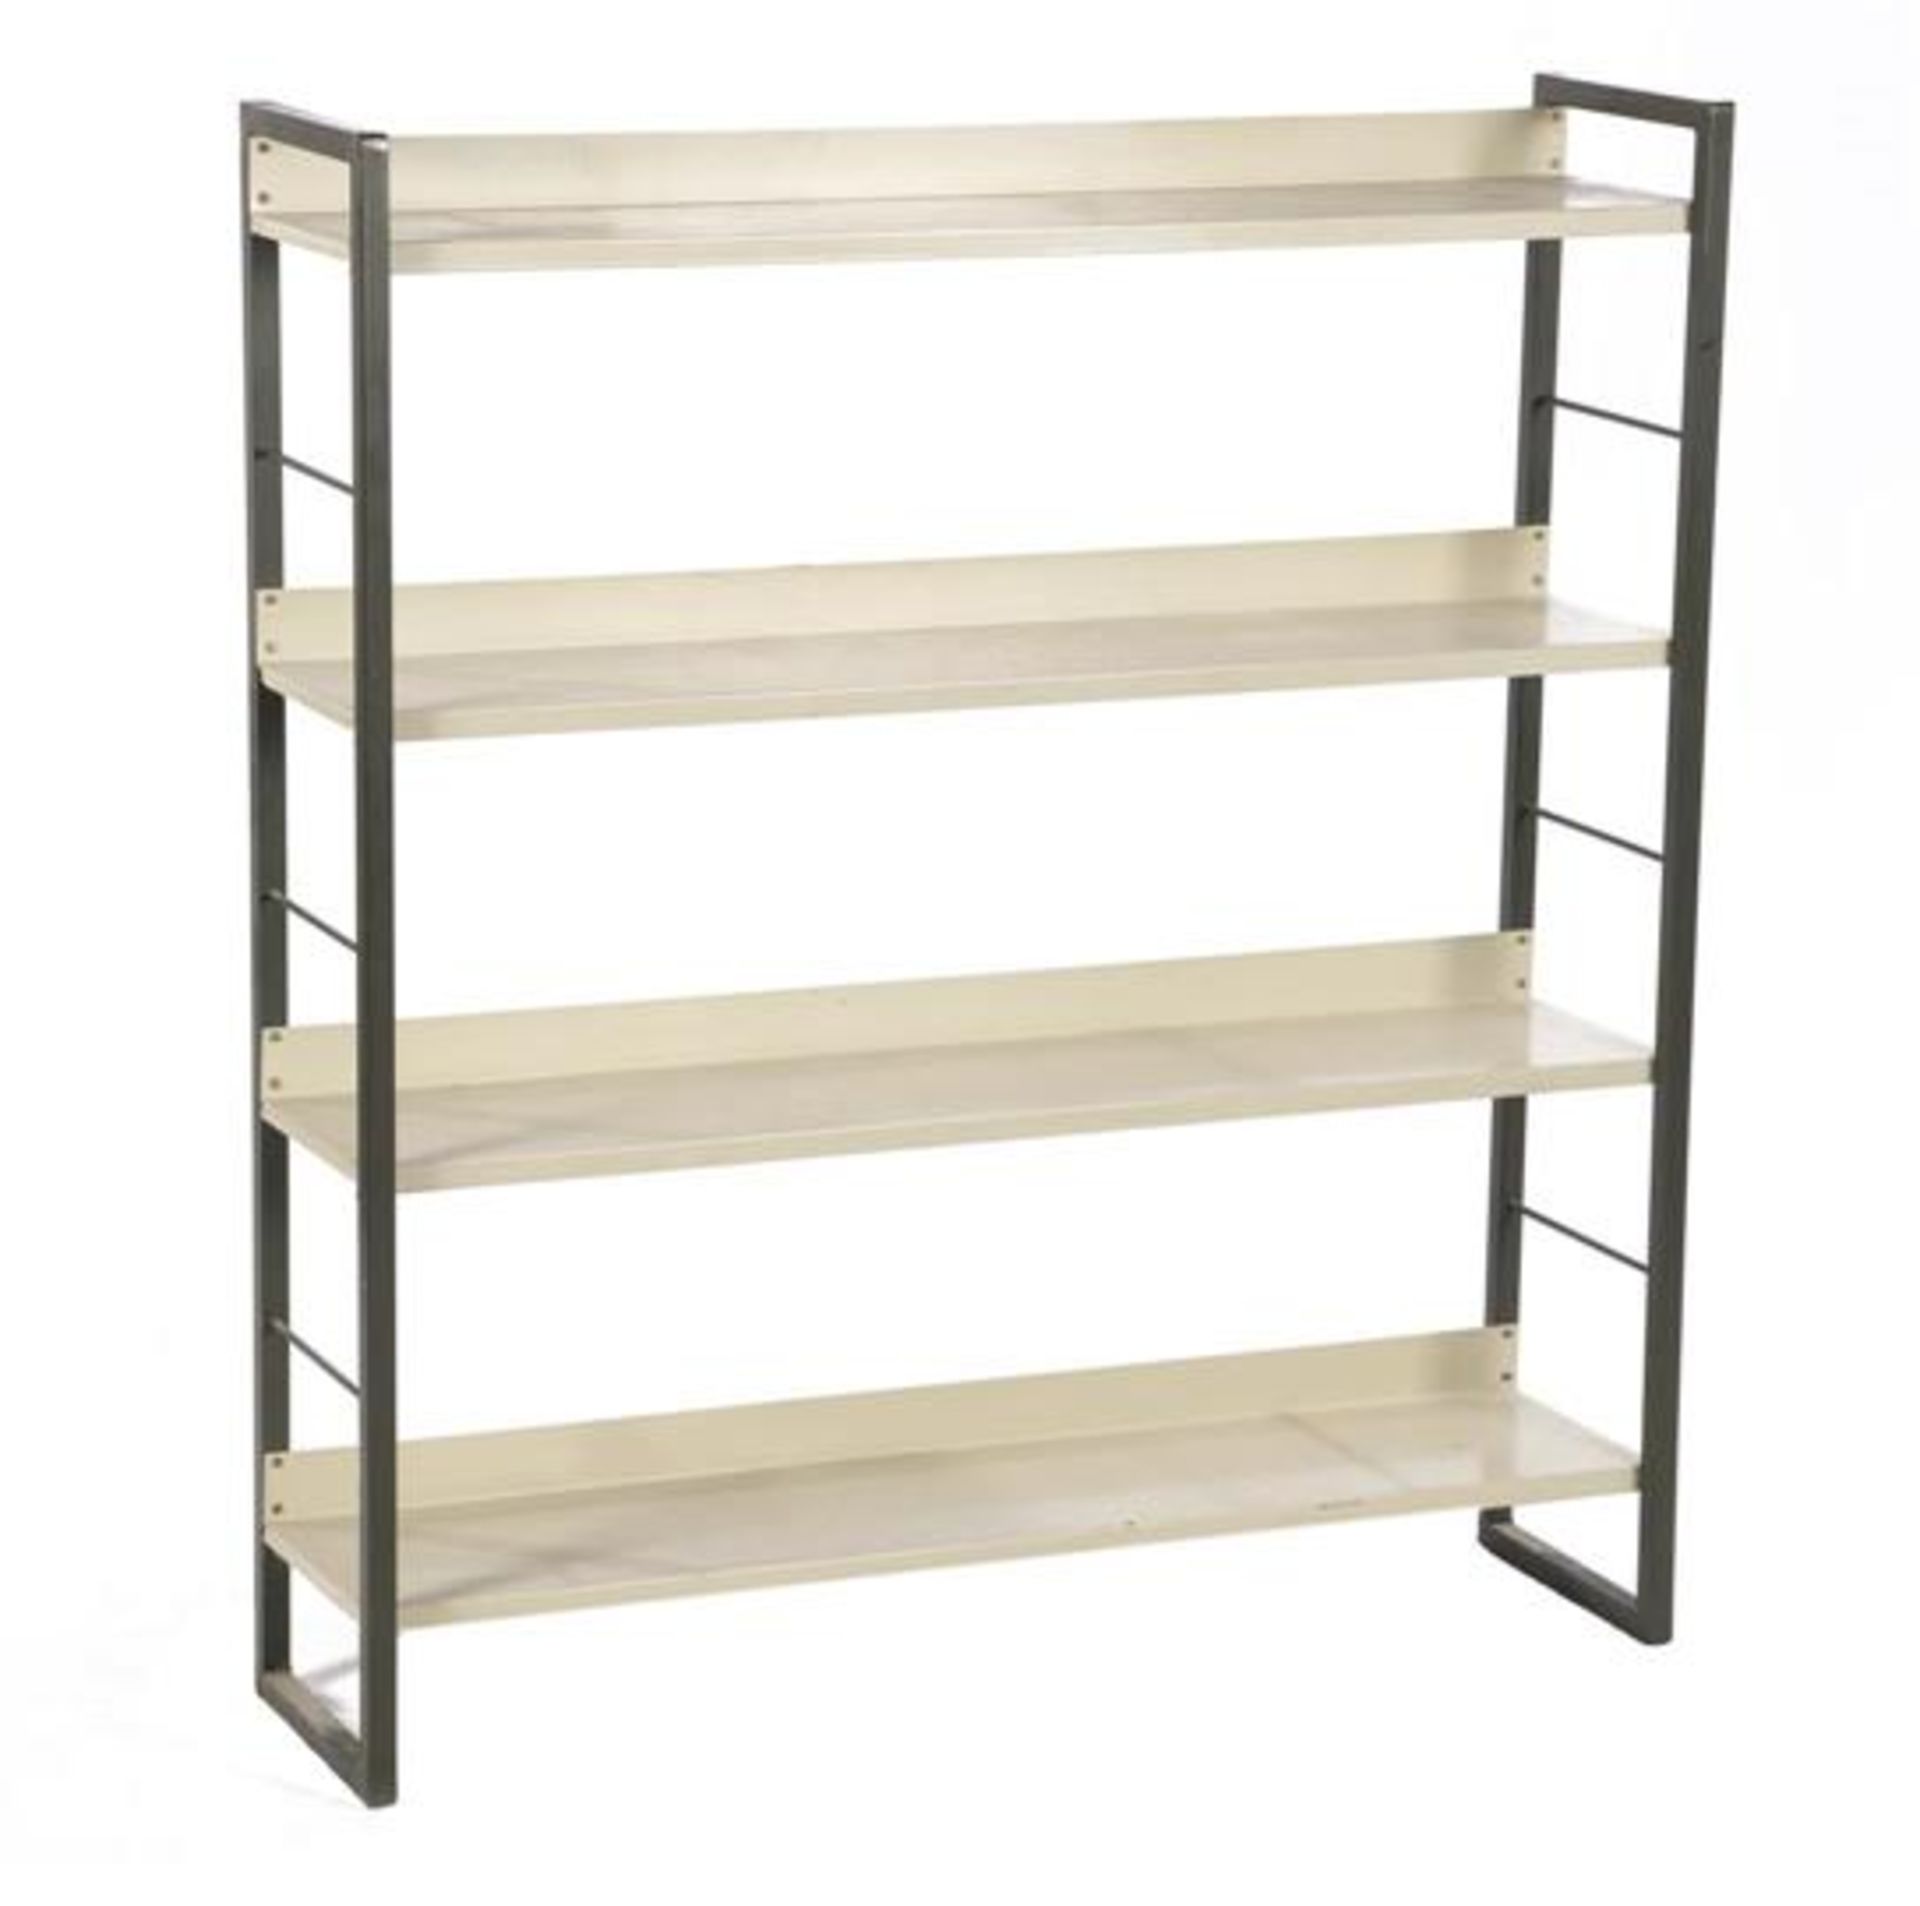 Metal wall rack with 4 shelves, 103 cm high, 98 cm wide and 25 cm deep